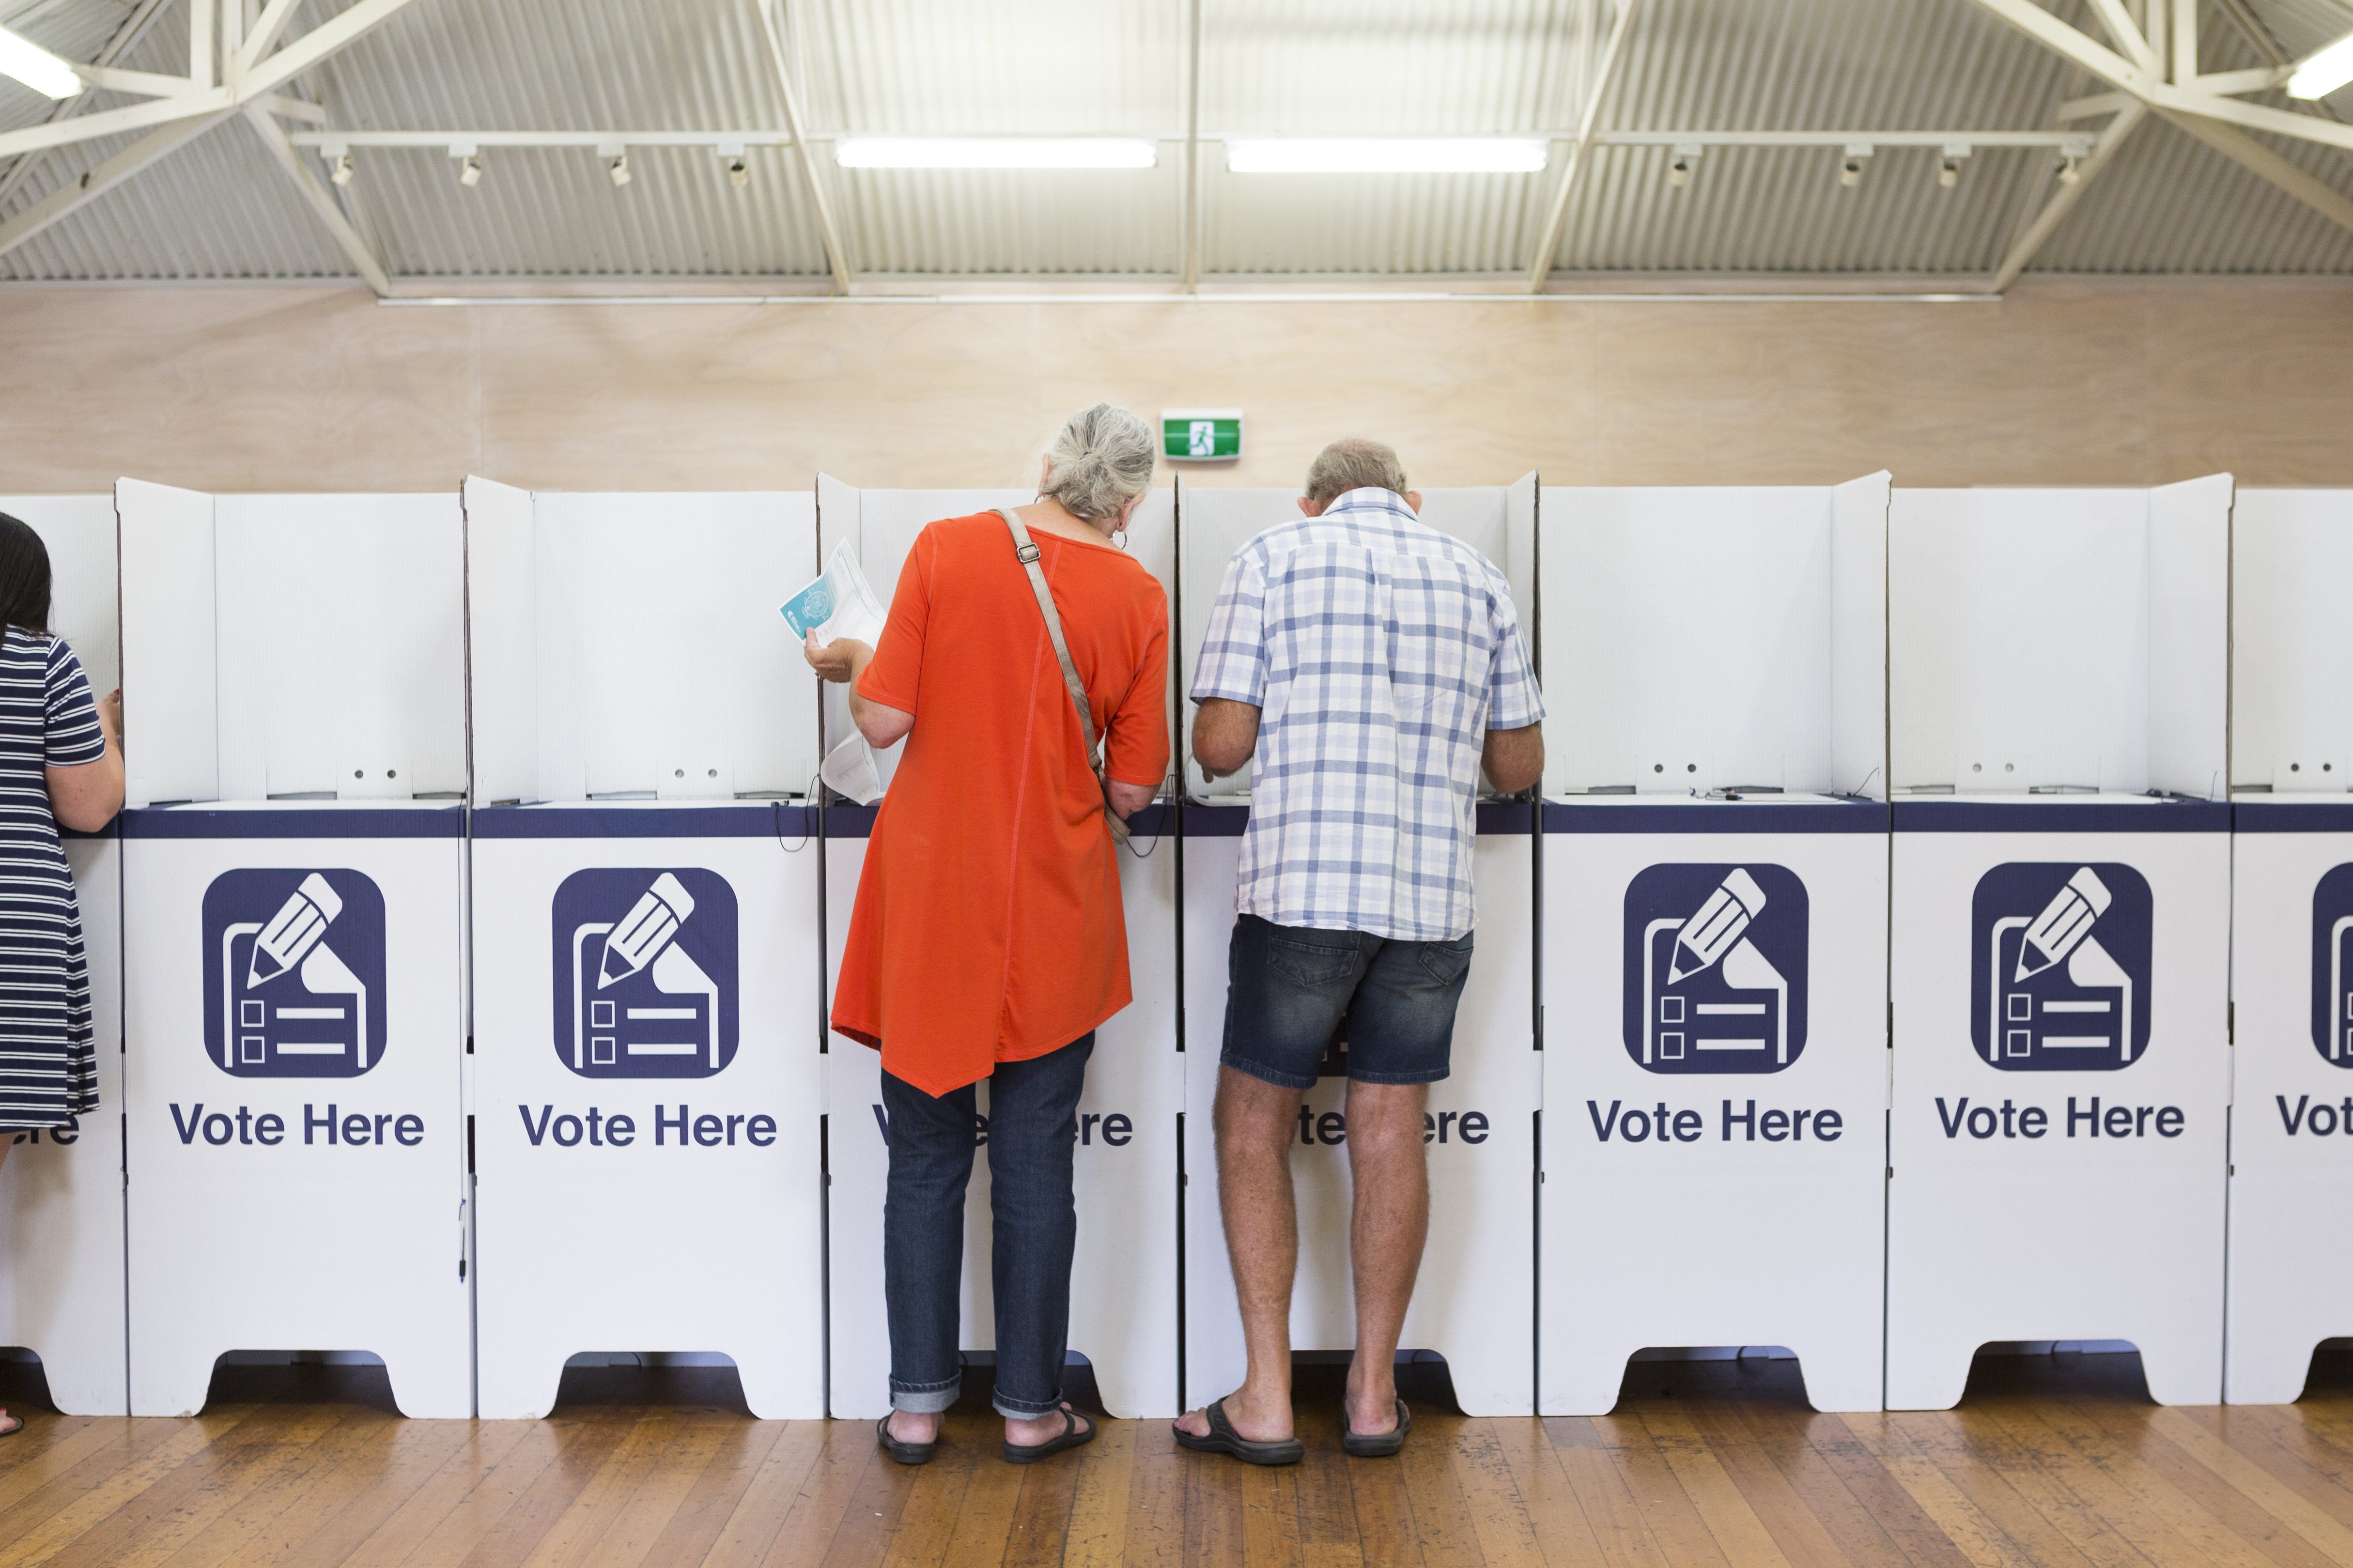 Election day in Batemans Bay, voters turn out and take part